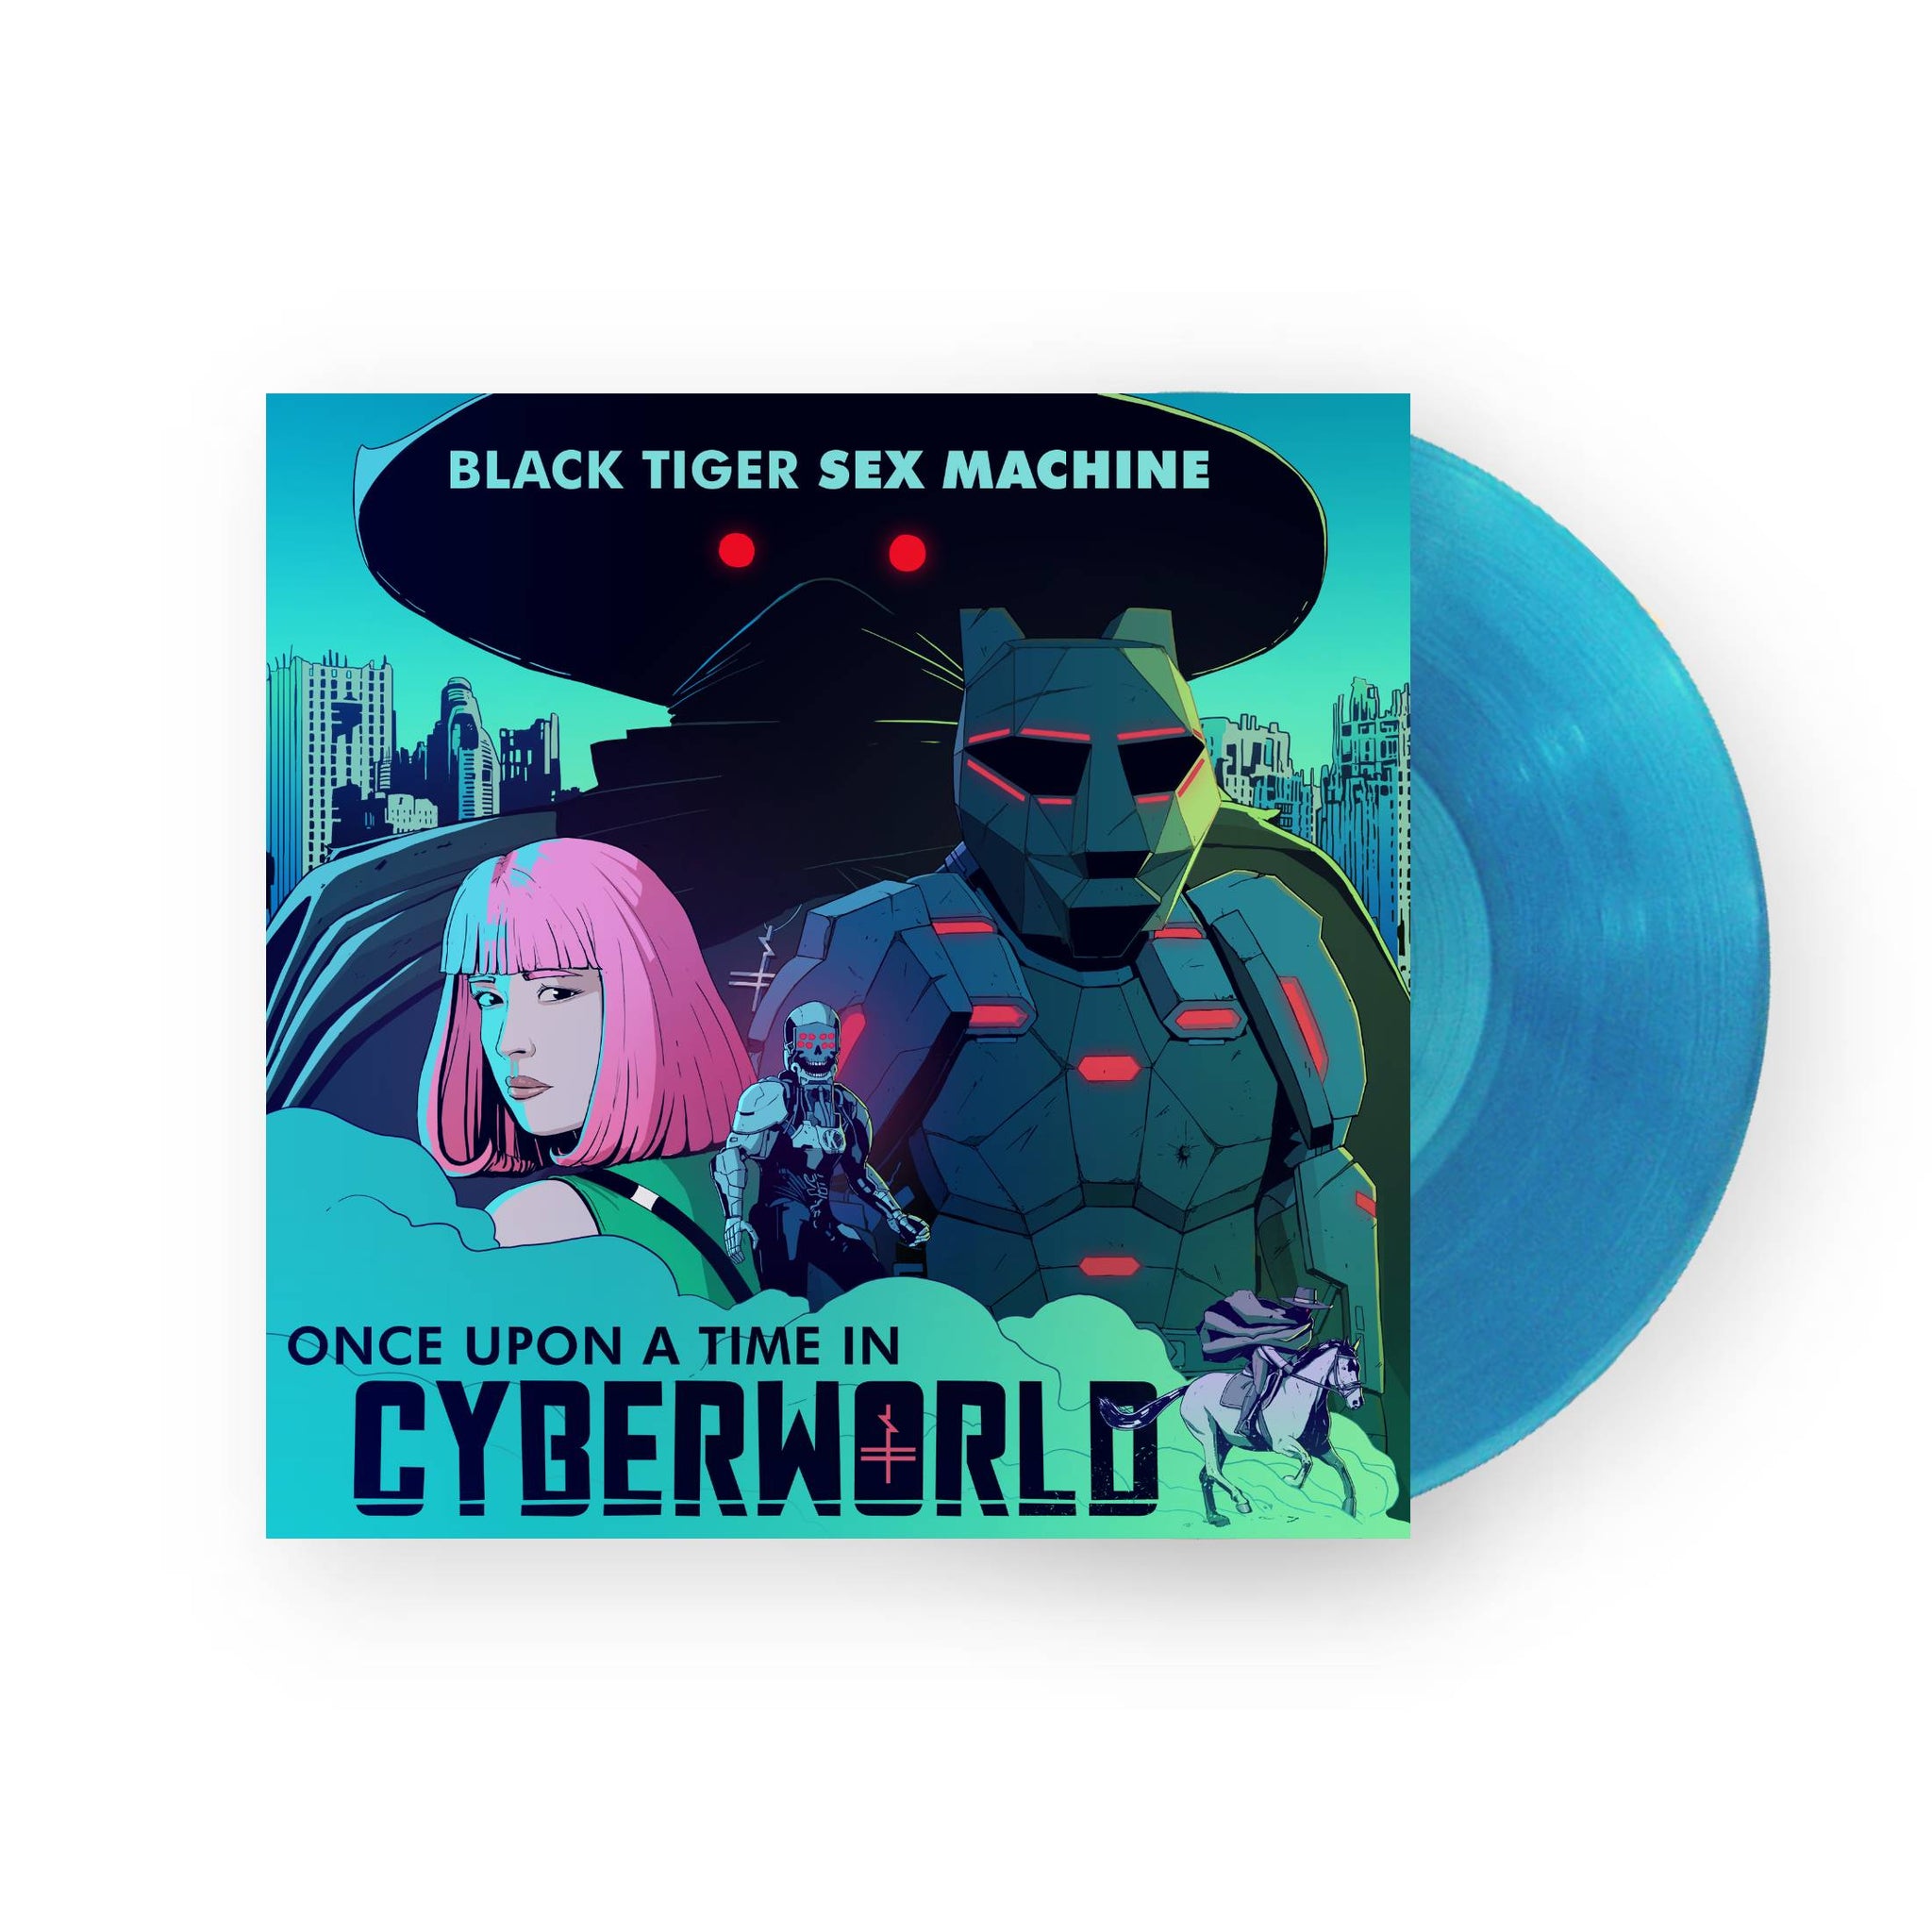 Black Tiger Sex Machine - Once Upon A Time In Cyberworld LP (Turquoise Vinyl)